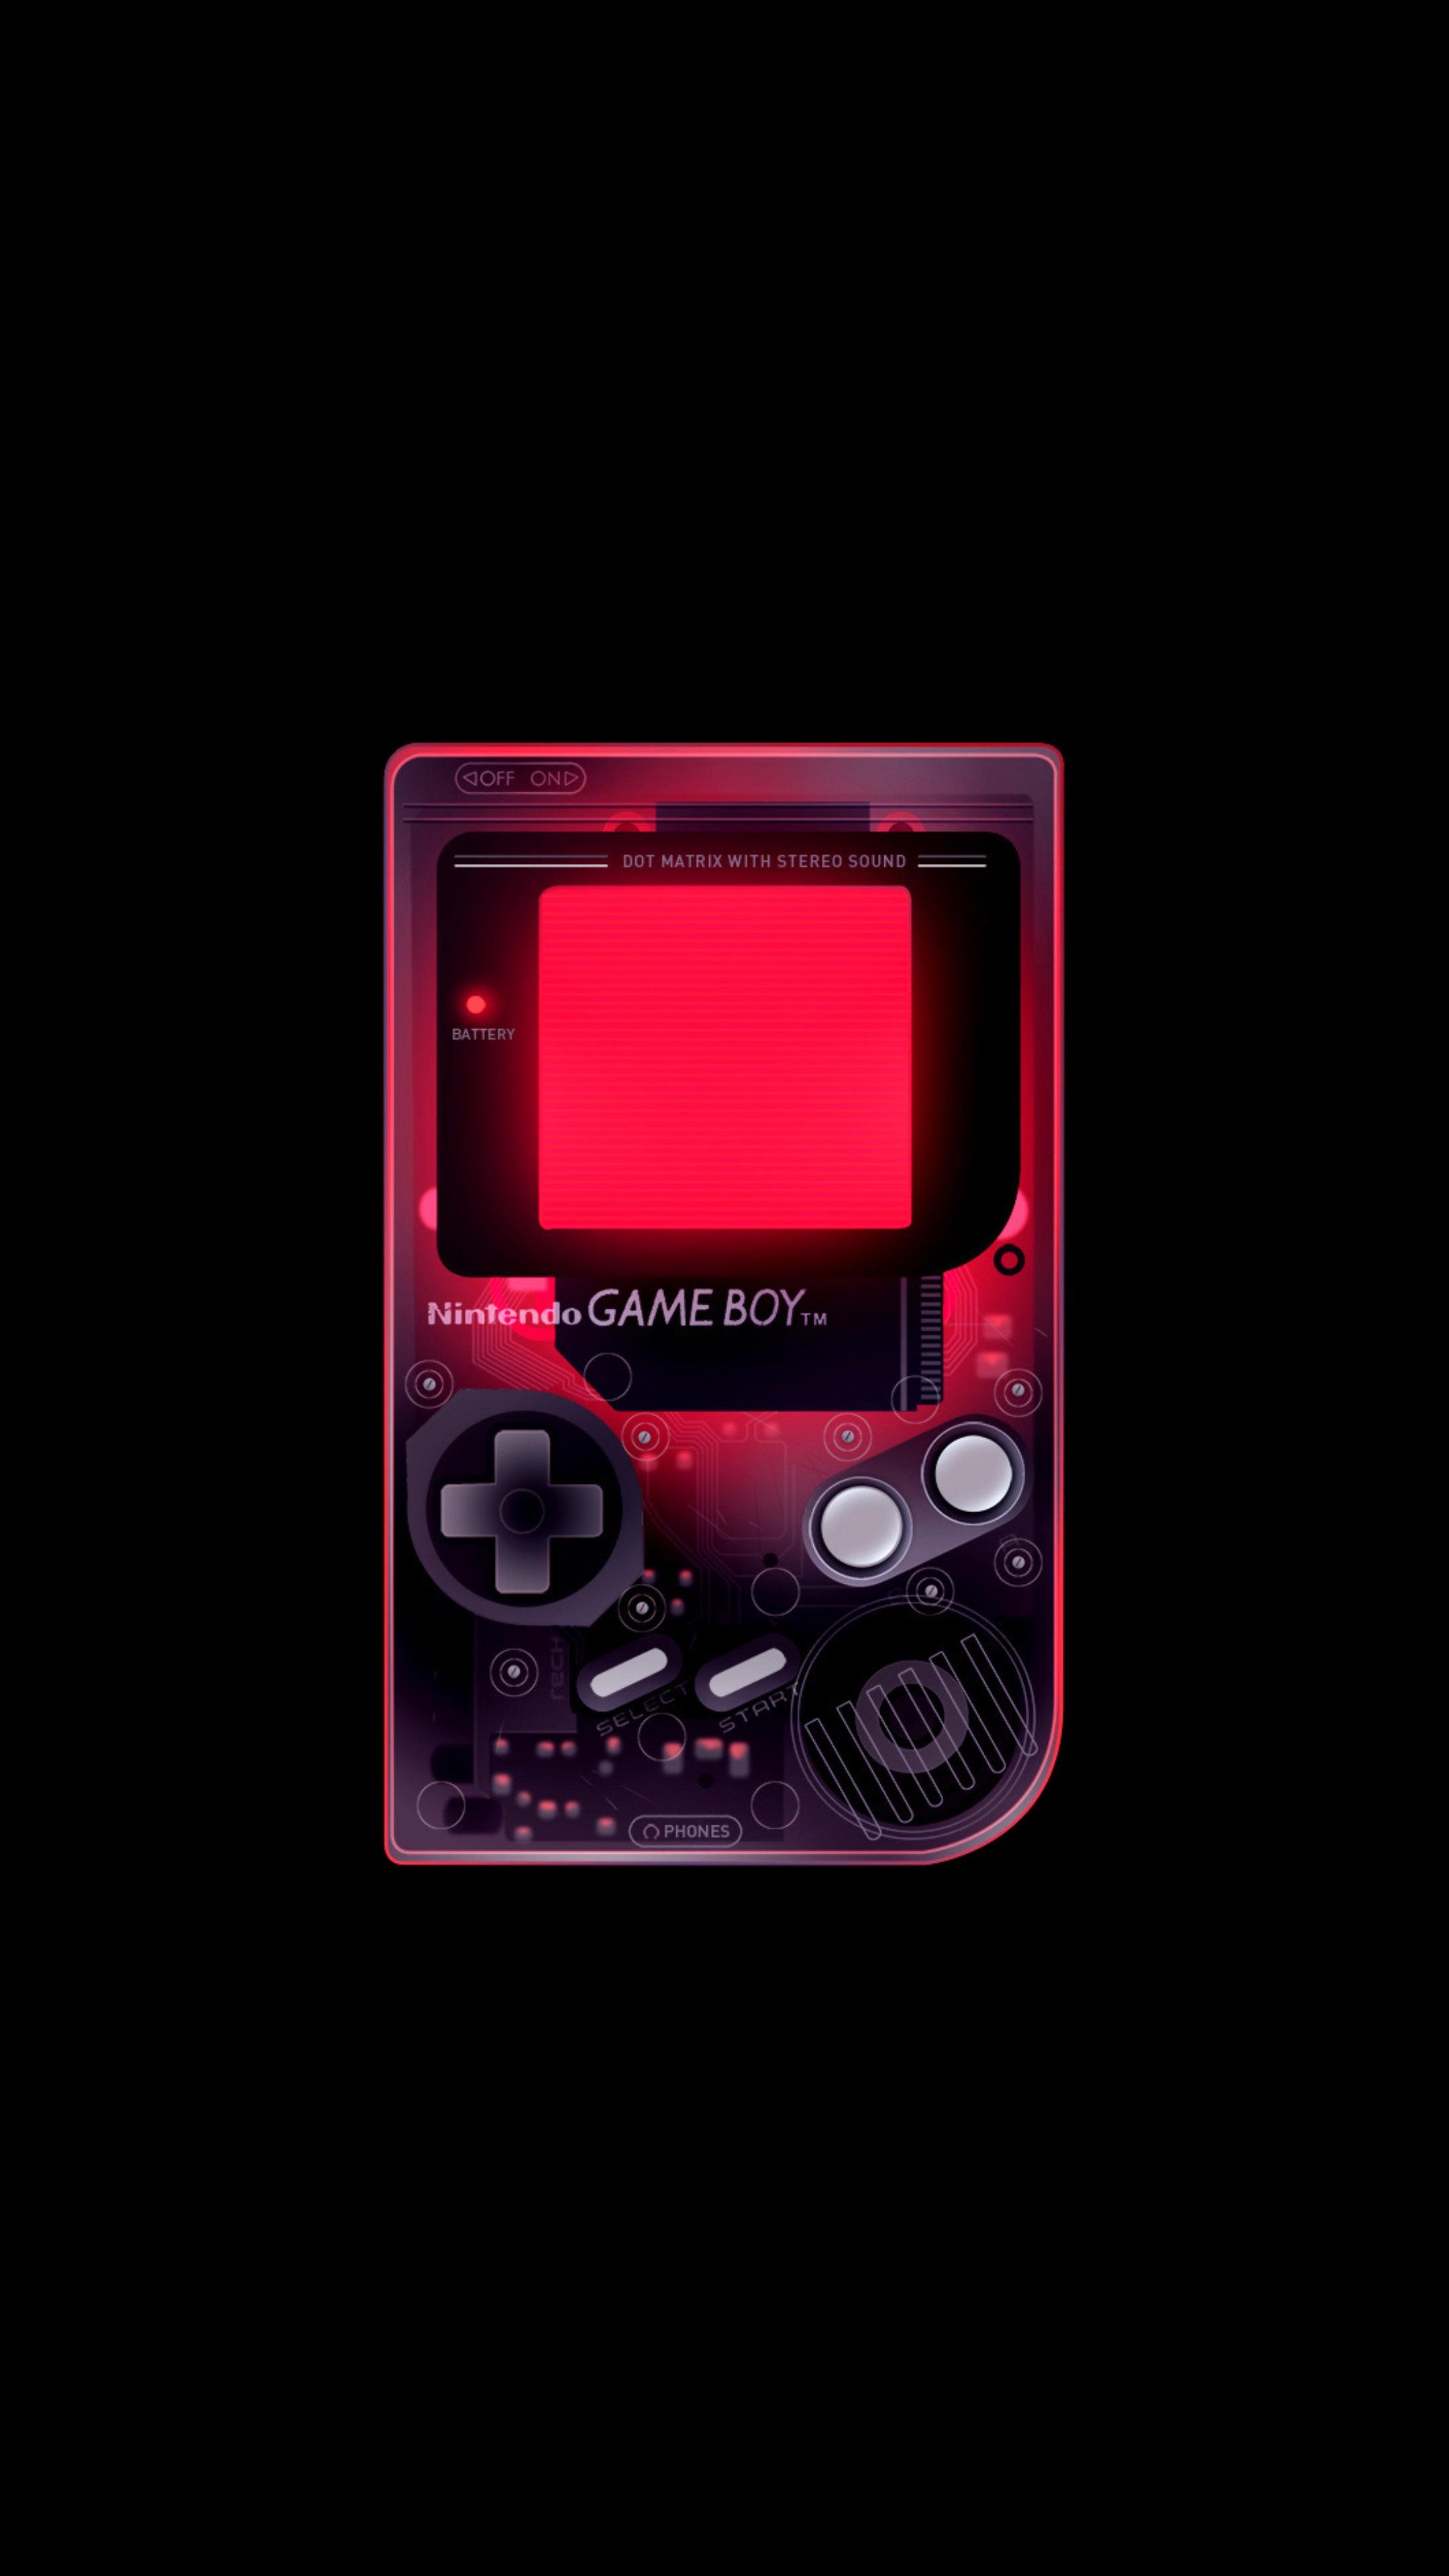 Nintendo: A portable handheld console released initially in 1989, Neon. 2160x3840 4K Wallpaper.